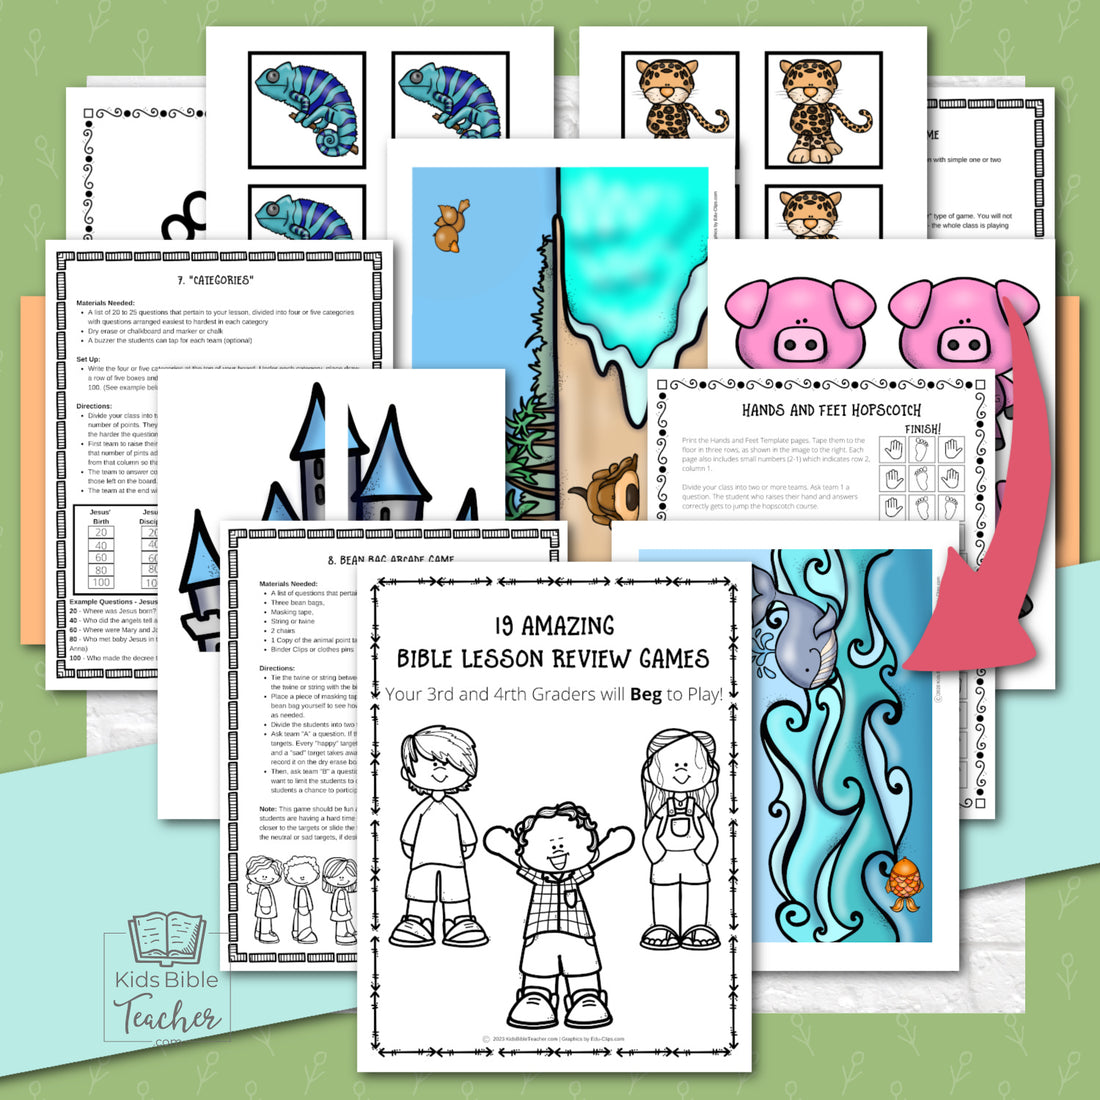 19 AMAZING Bible Lesson Review Games for 3rd and 4rth Grades